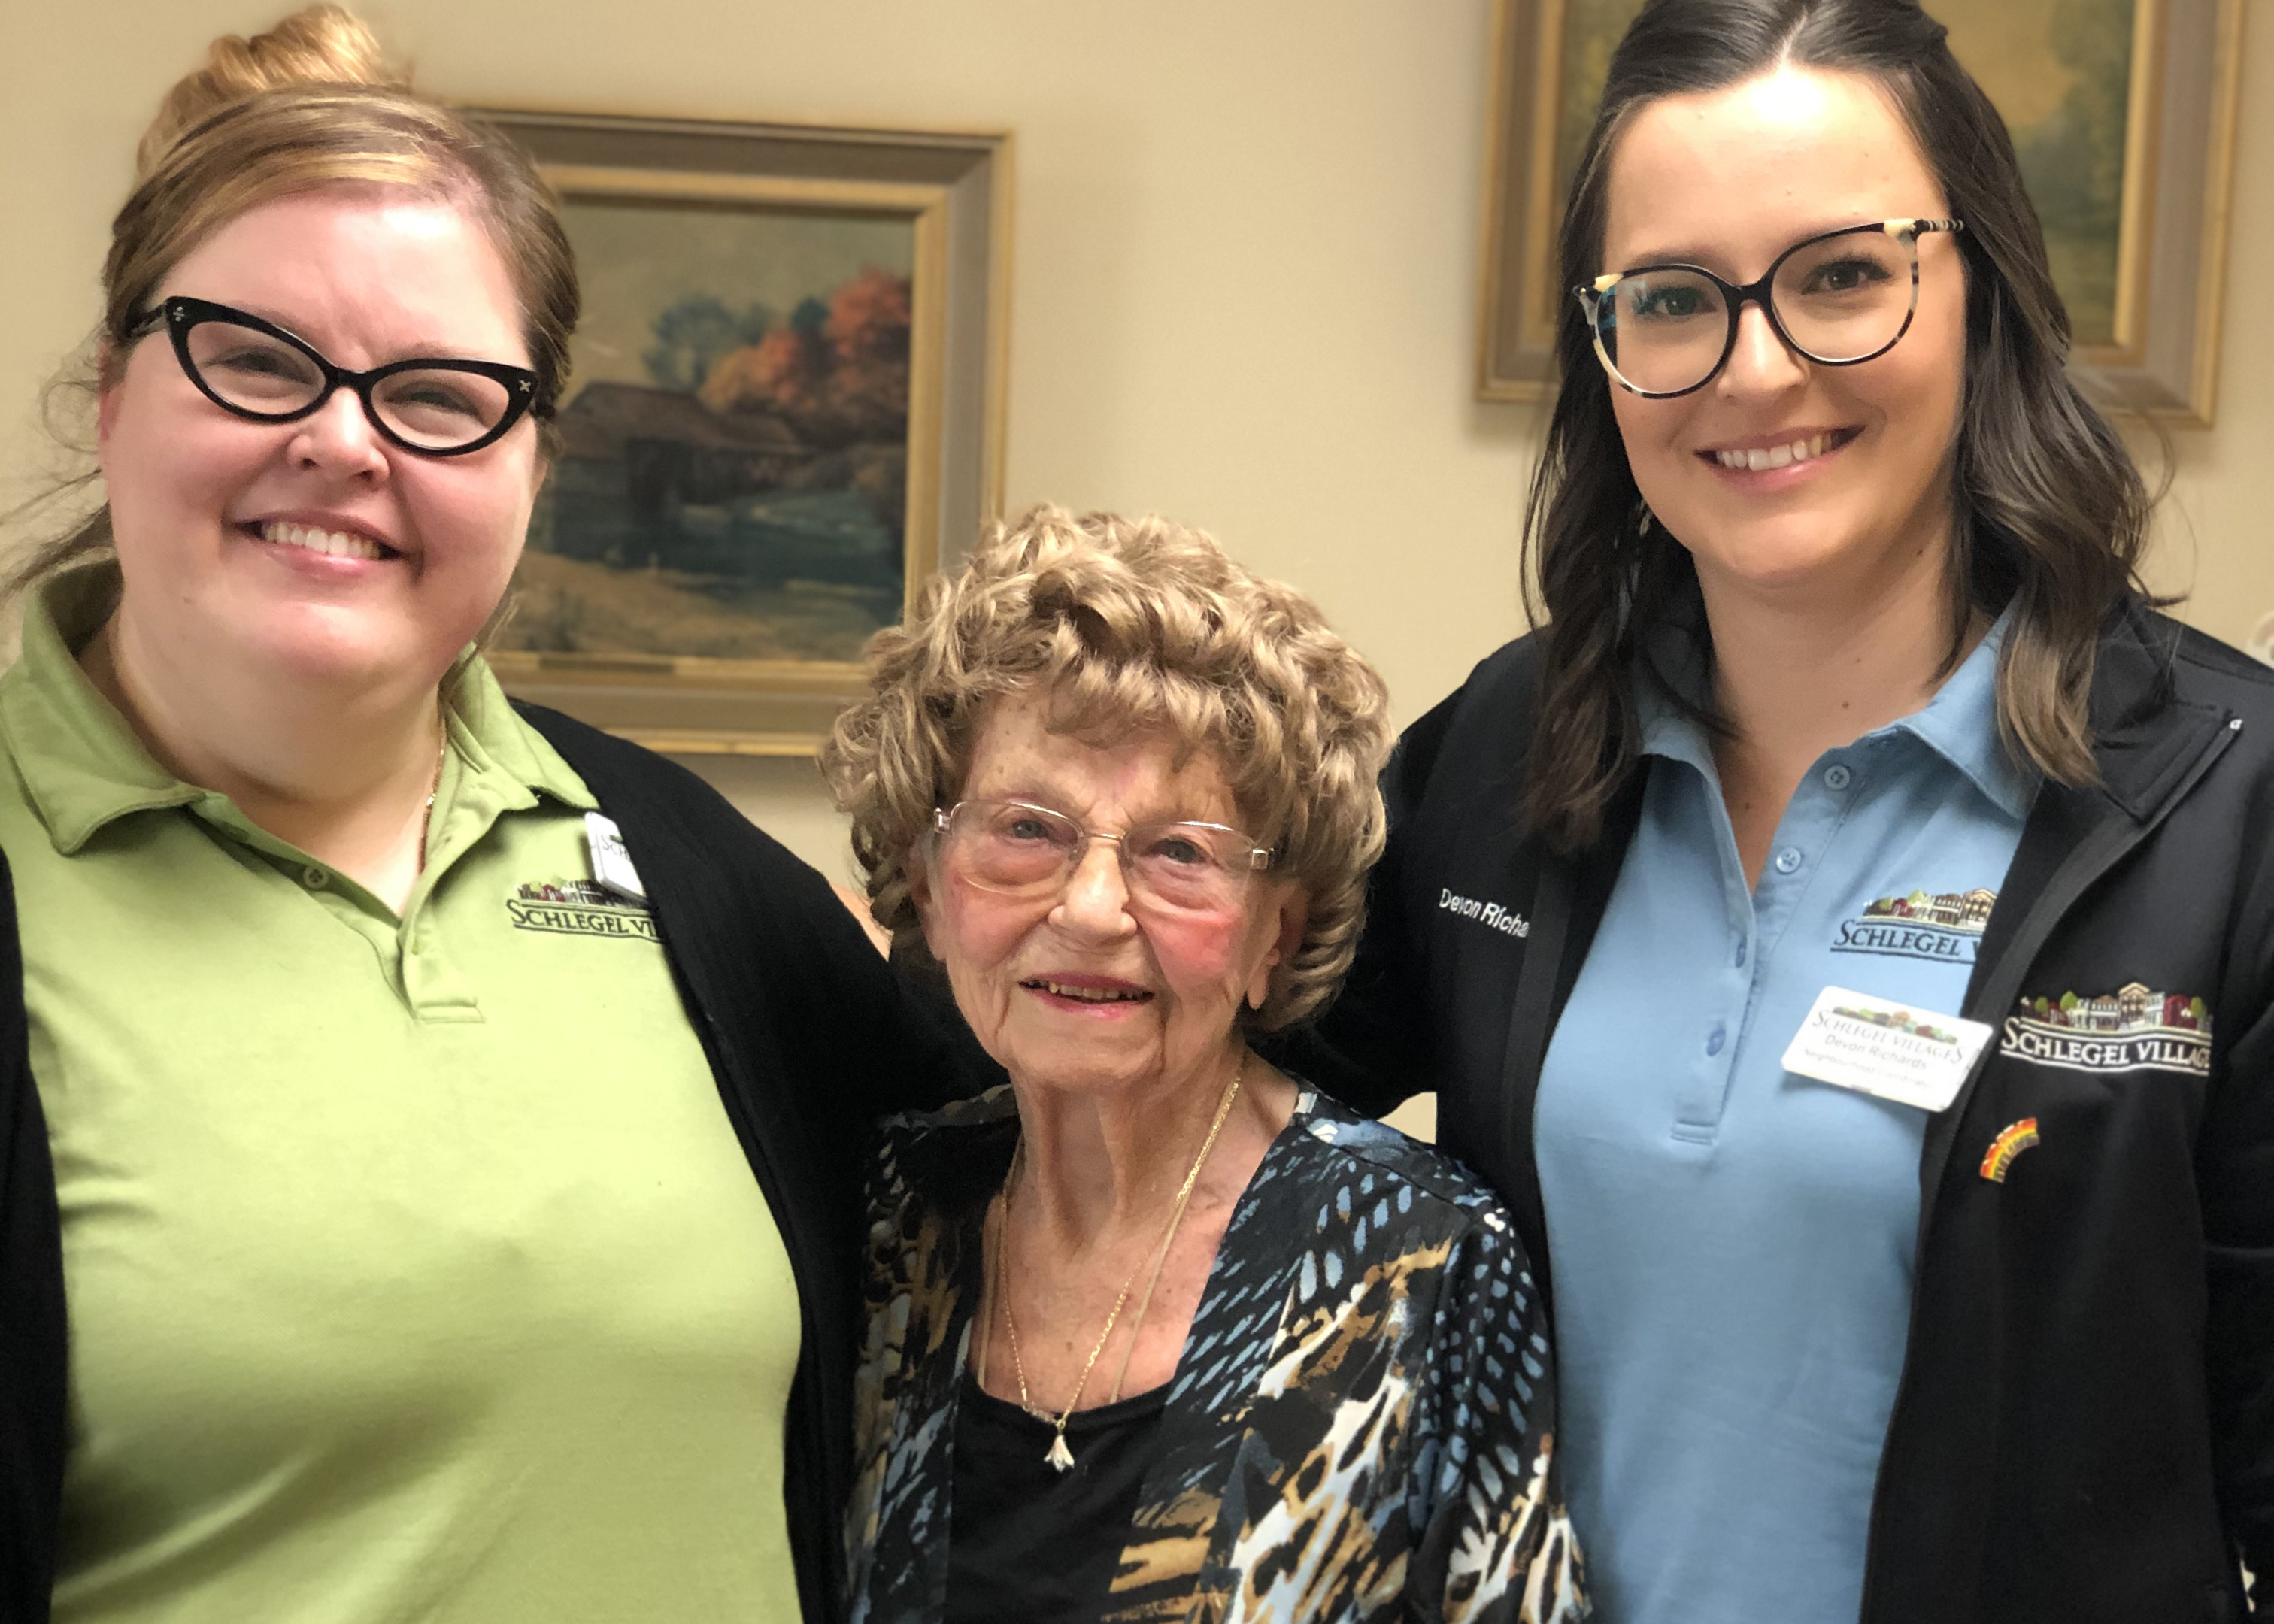 Becki and Devon are just two of many team members going  above and beyond with residents like Donna at Riverside Glen to connect them with loved ones .